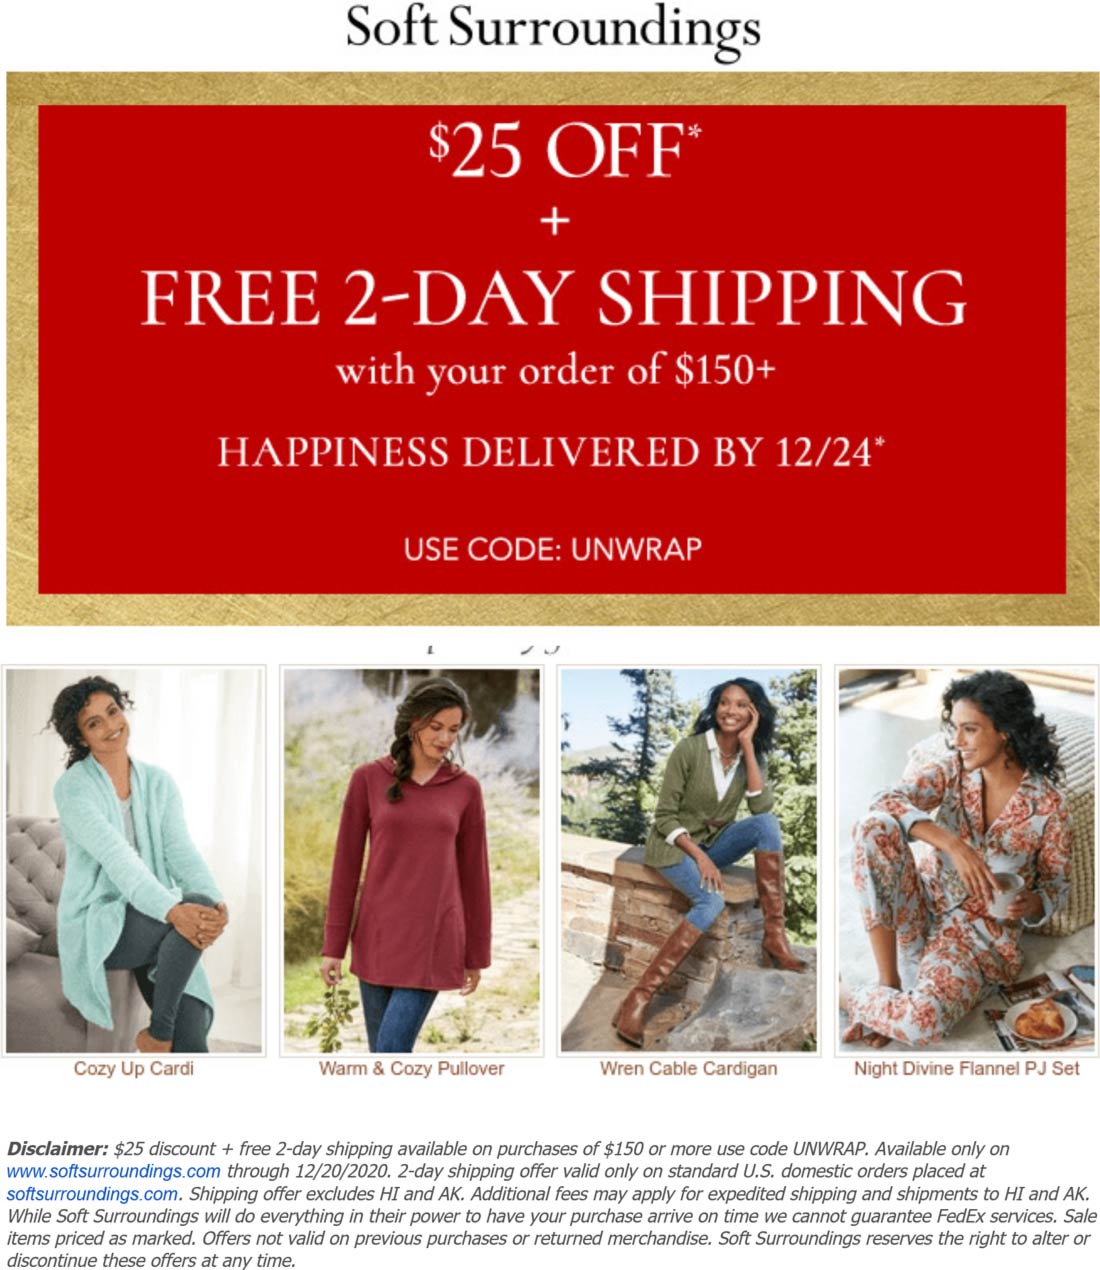 Soft Surroundings stores Coupon  $25 off $150 at Soft Surroundings via promo code UNWRAP #softsurroundings 